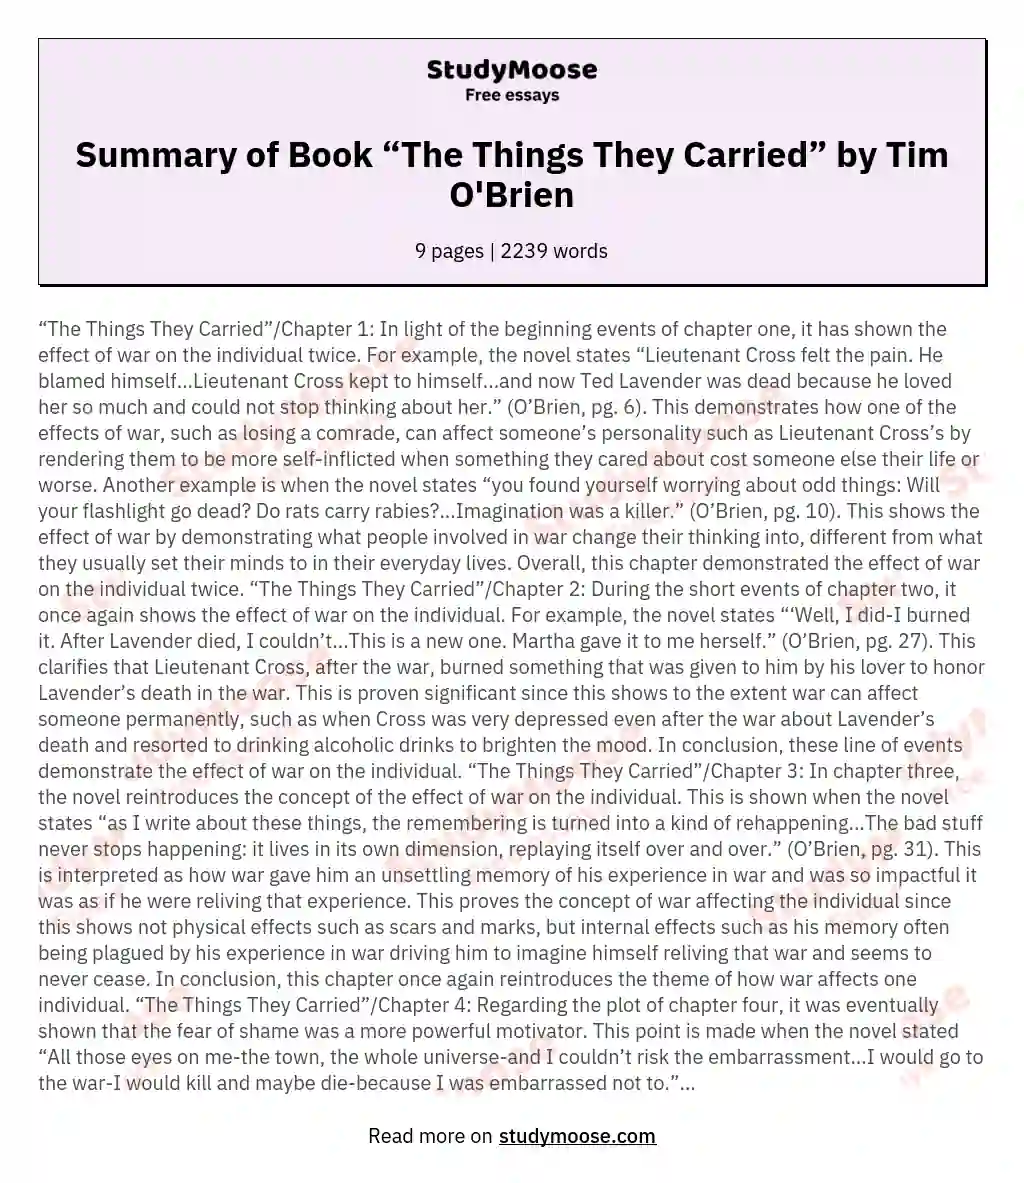 Summary of Book “The Things They Carried” by Tim O'Brien